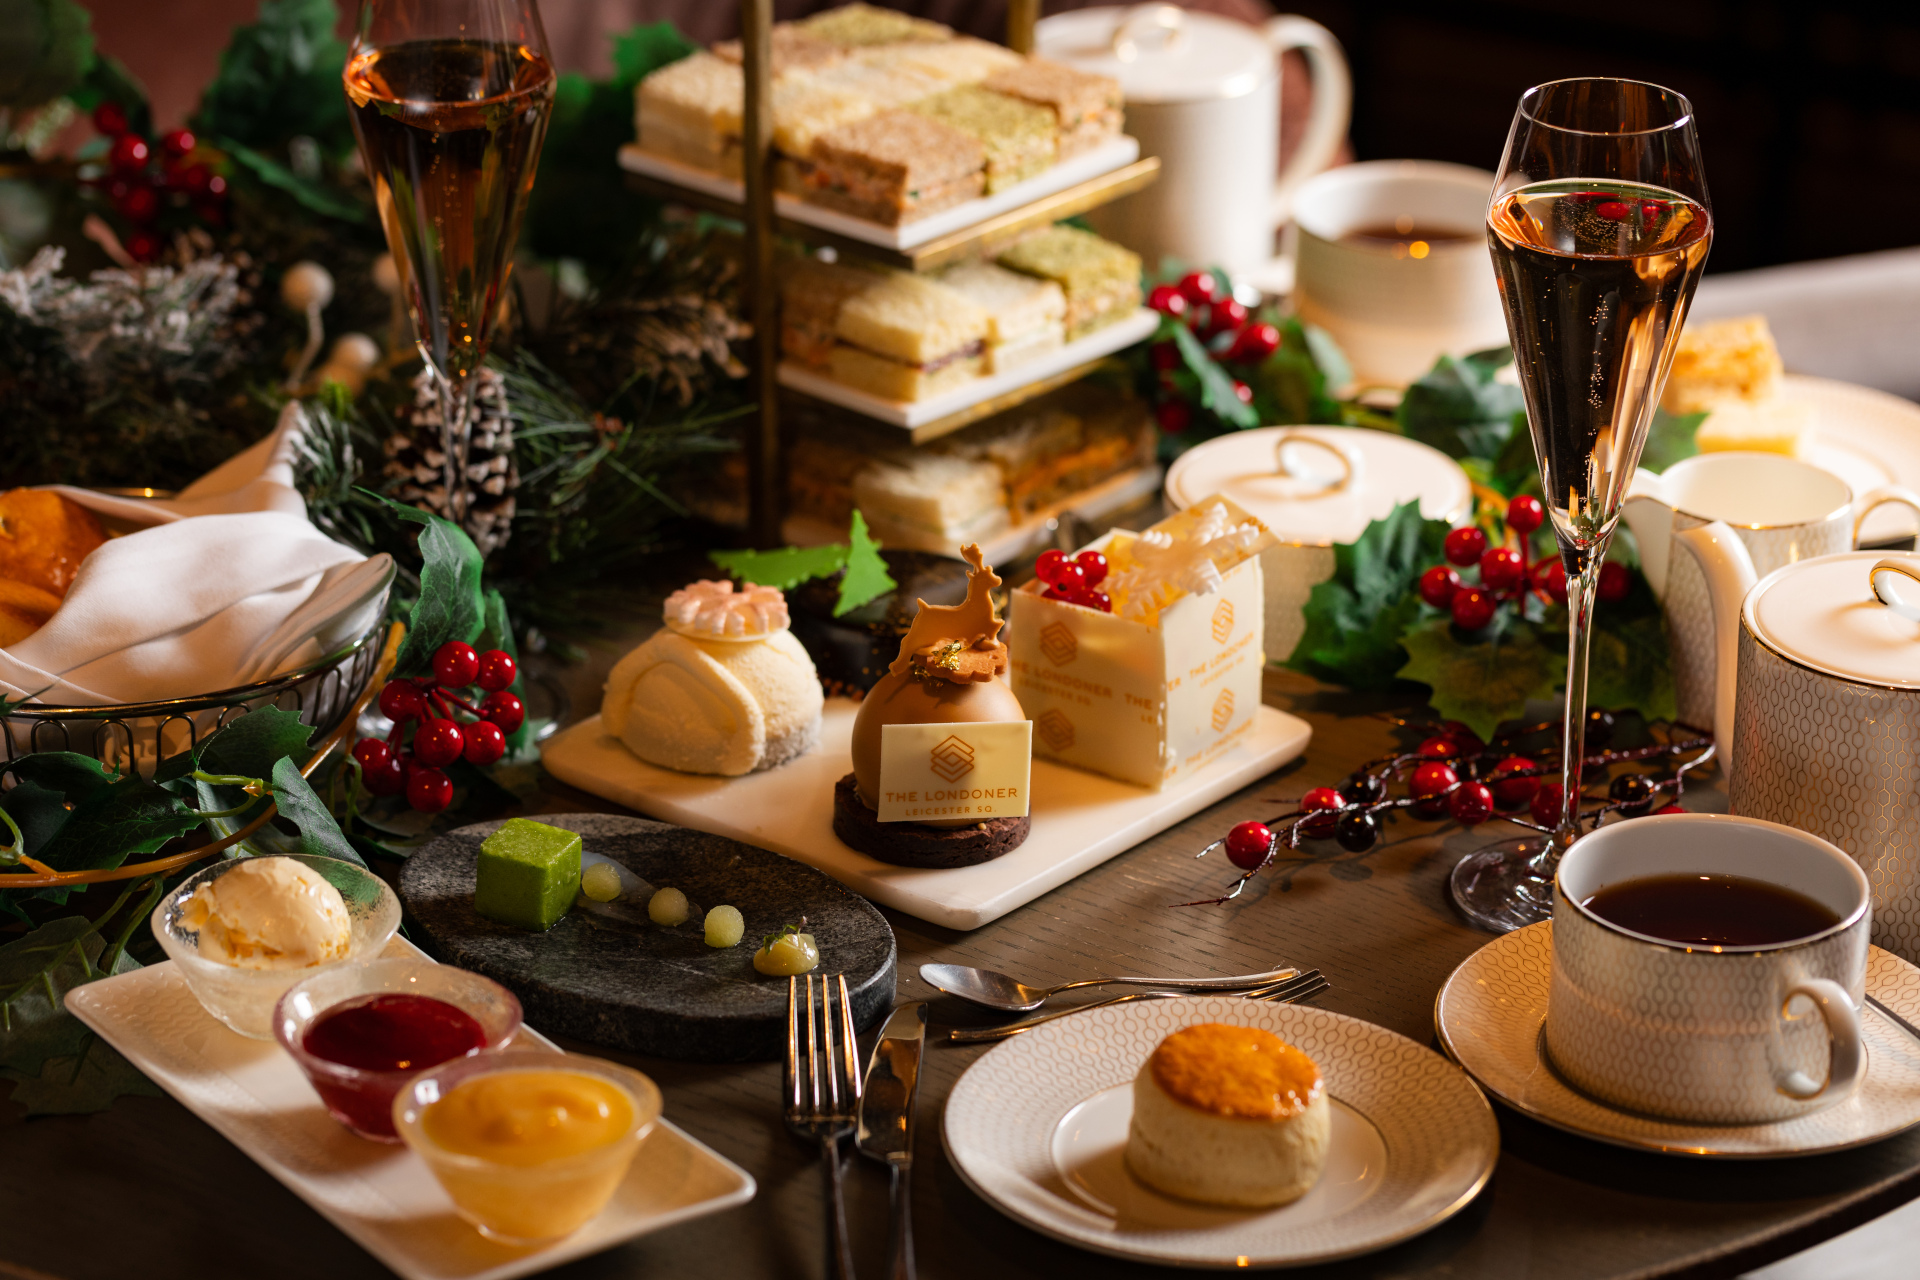 Festive afternoon tea spread at The Stage, London